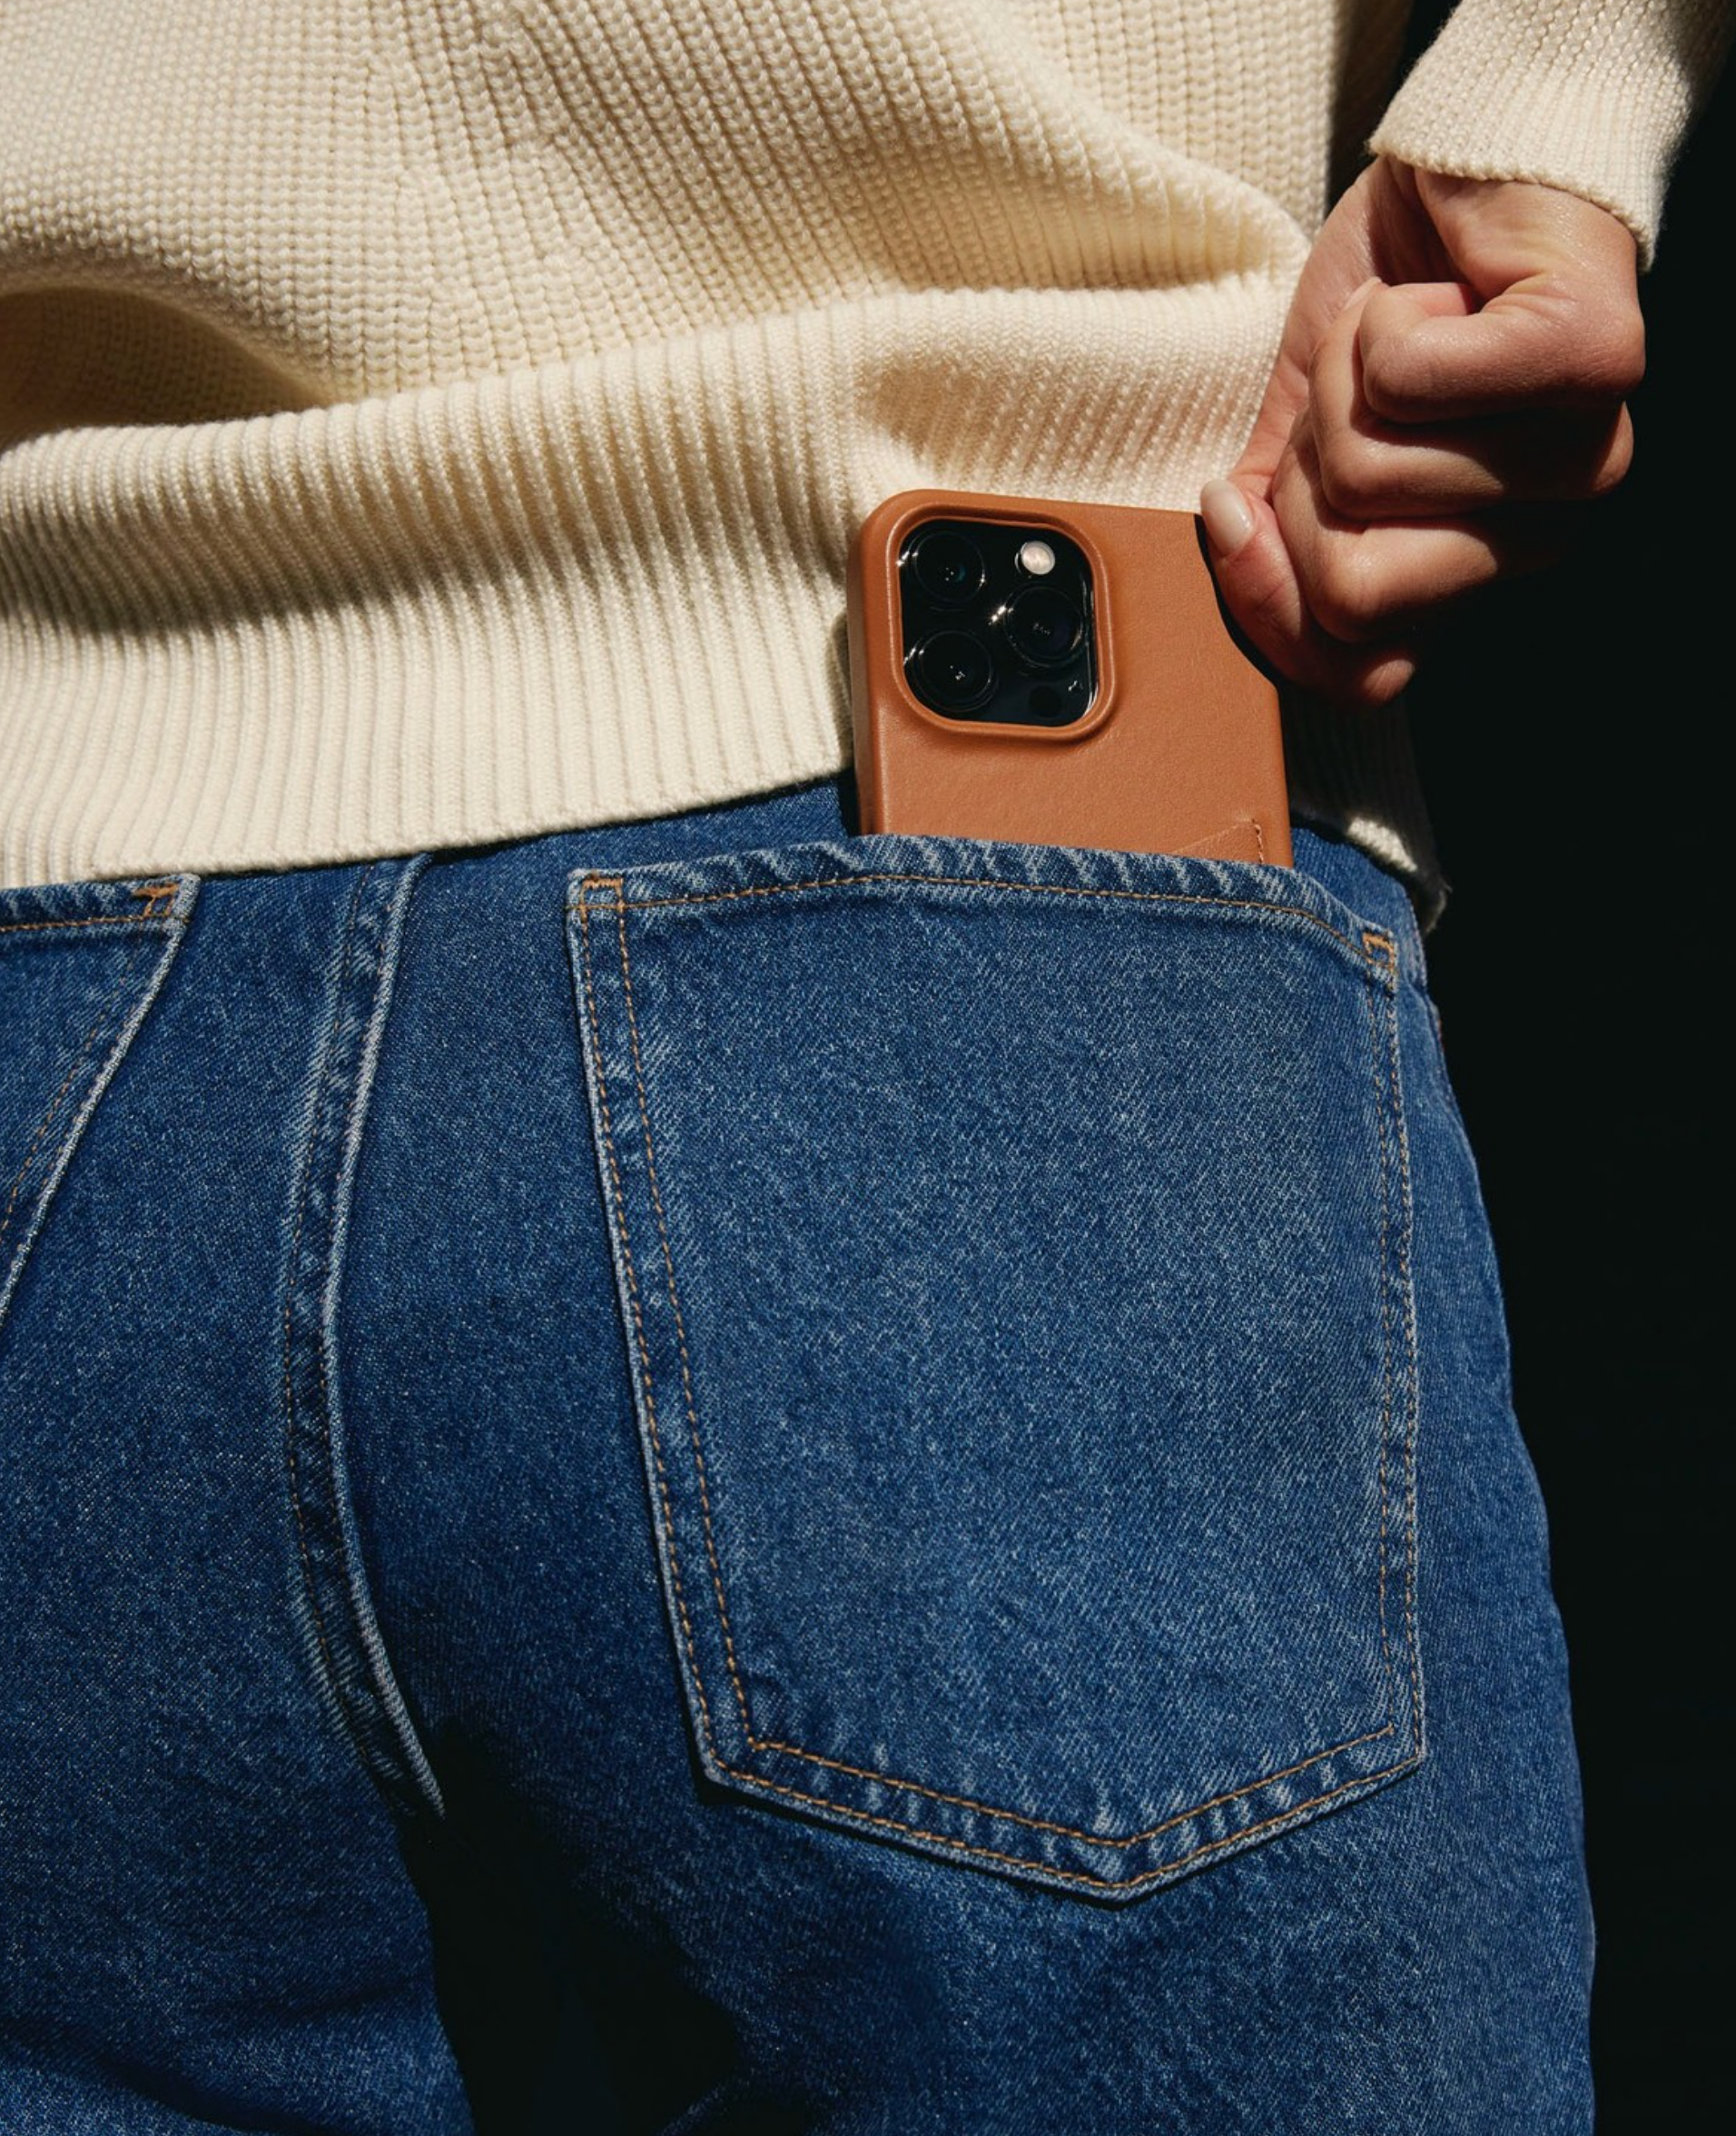 Mujjo iPhone 15 pro case in colour tan in the woman's jean's pocket